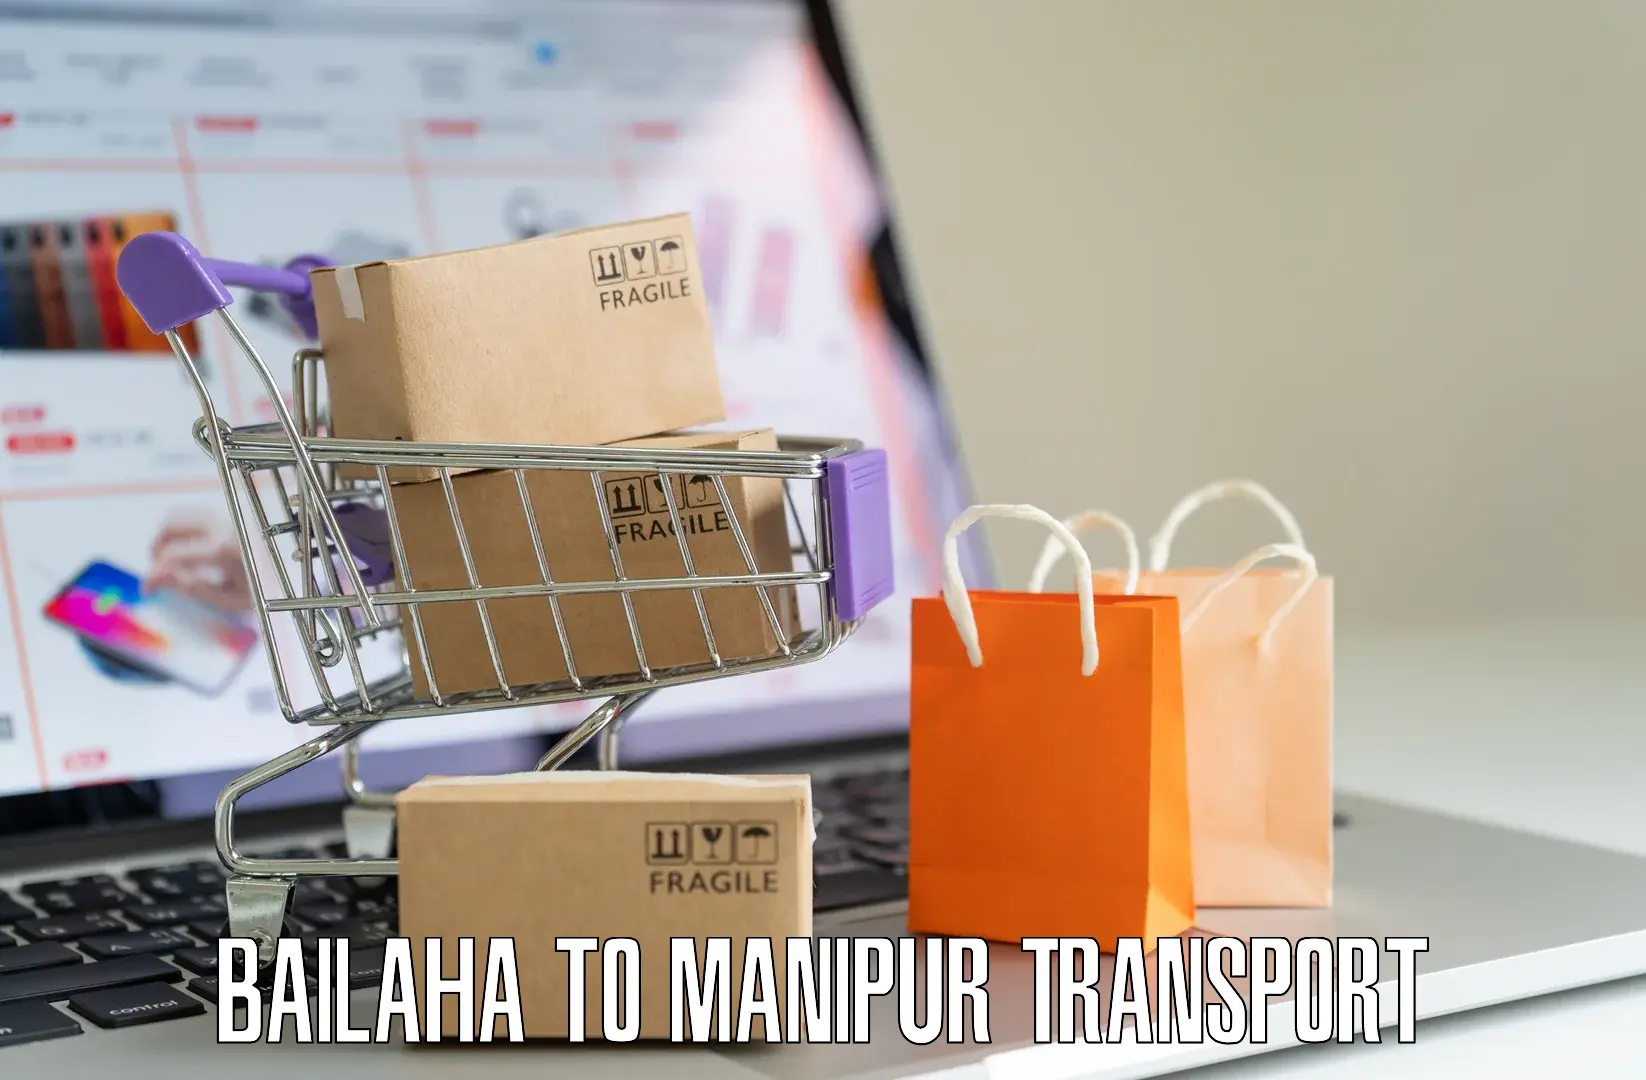 Truck transport companies in India Bailaha to Manipur